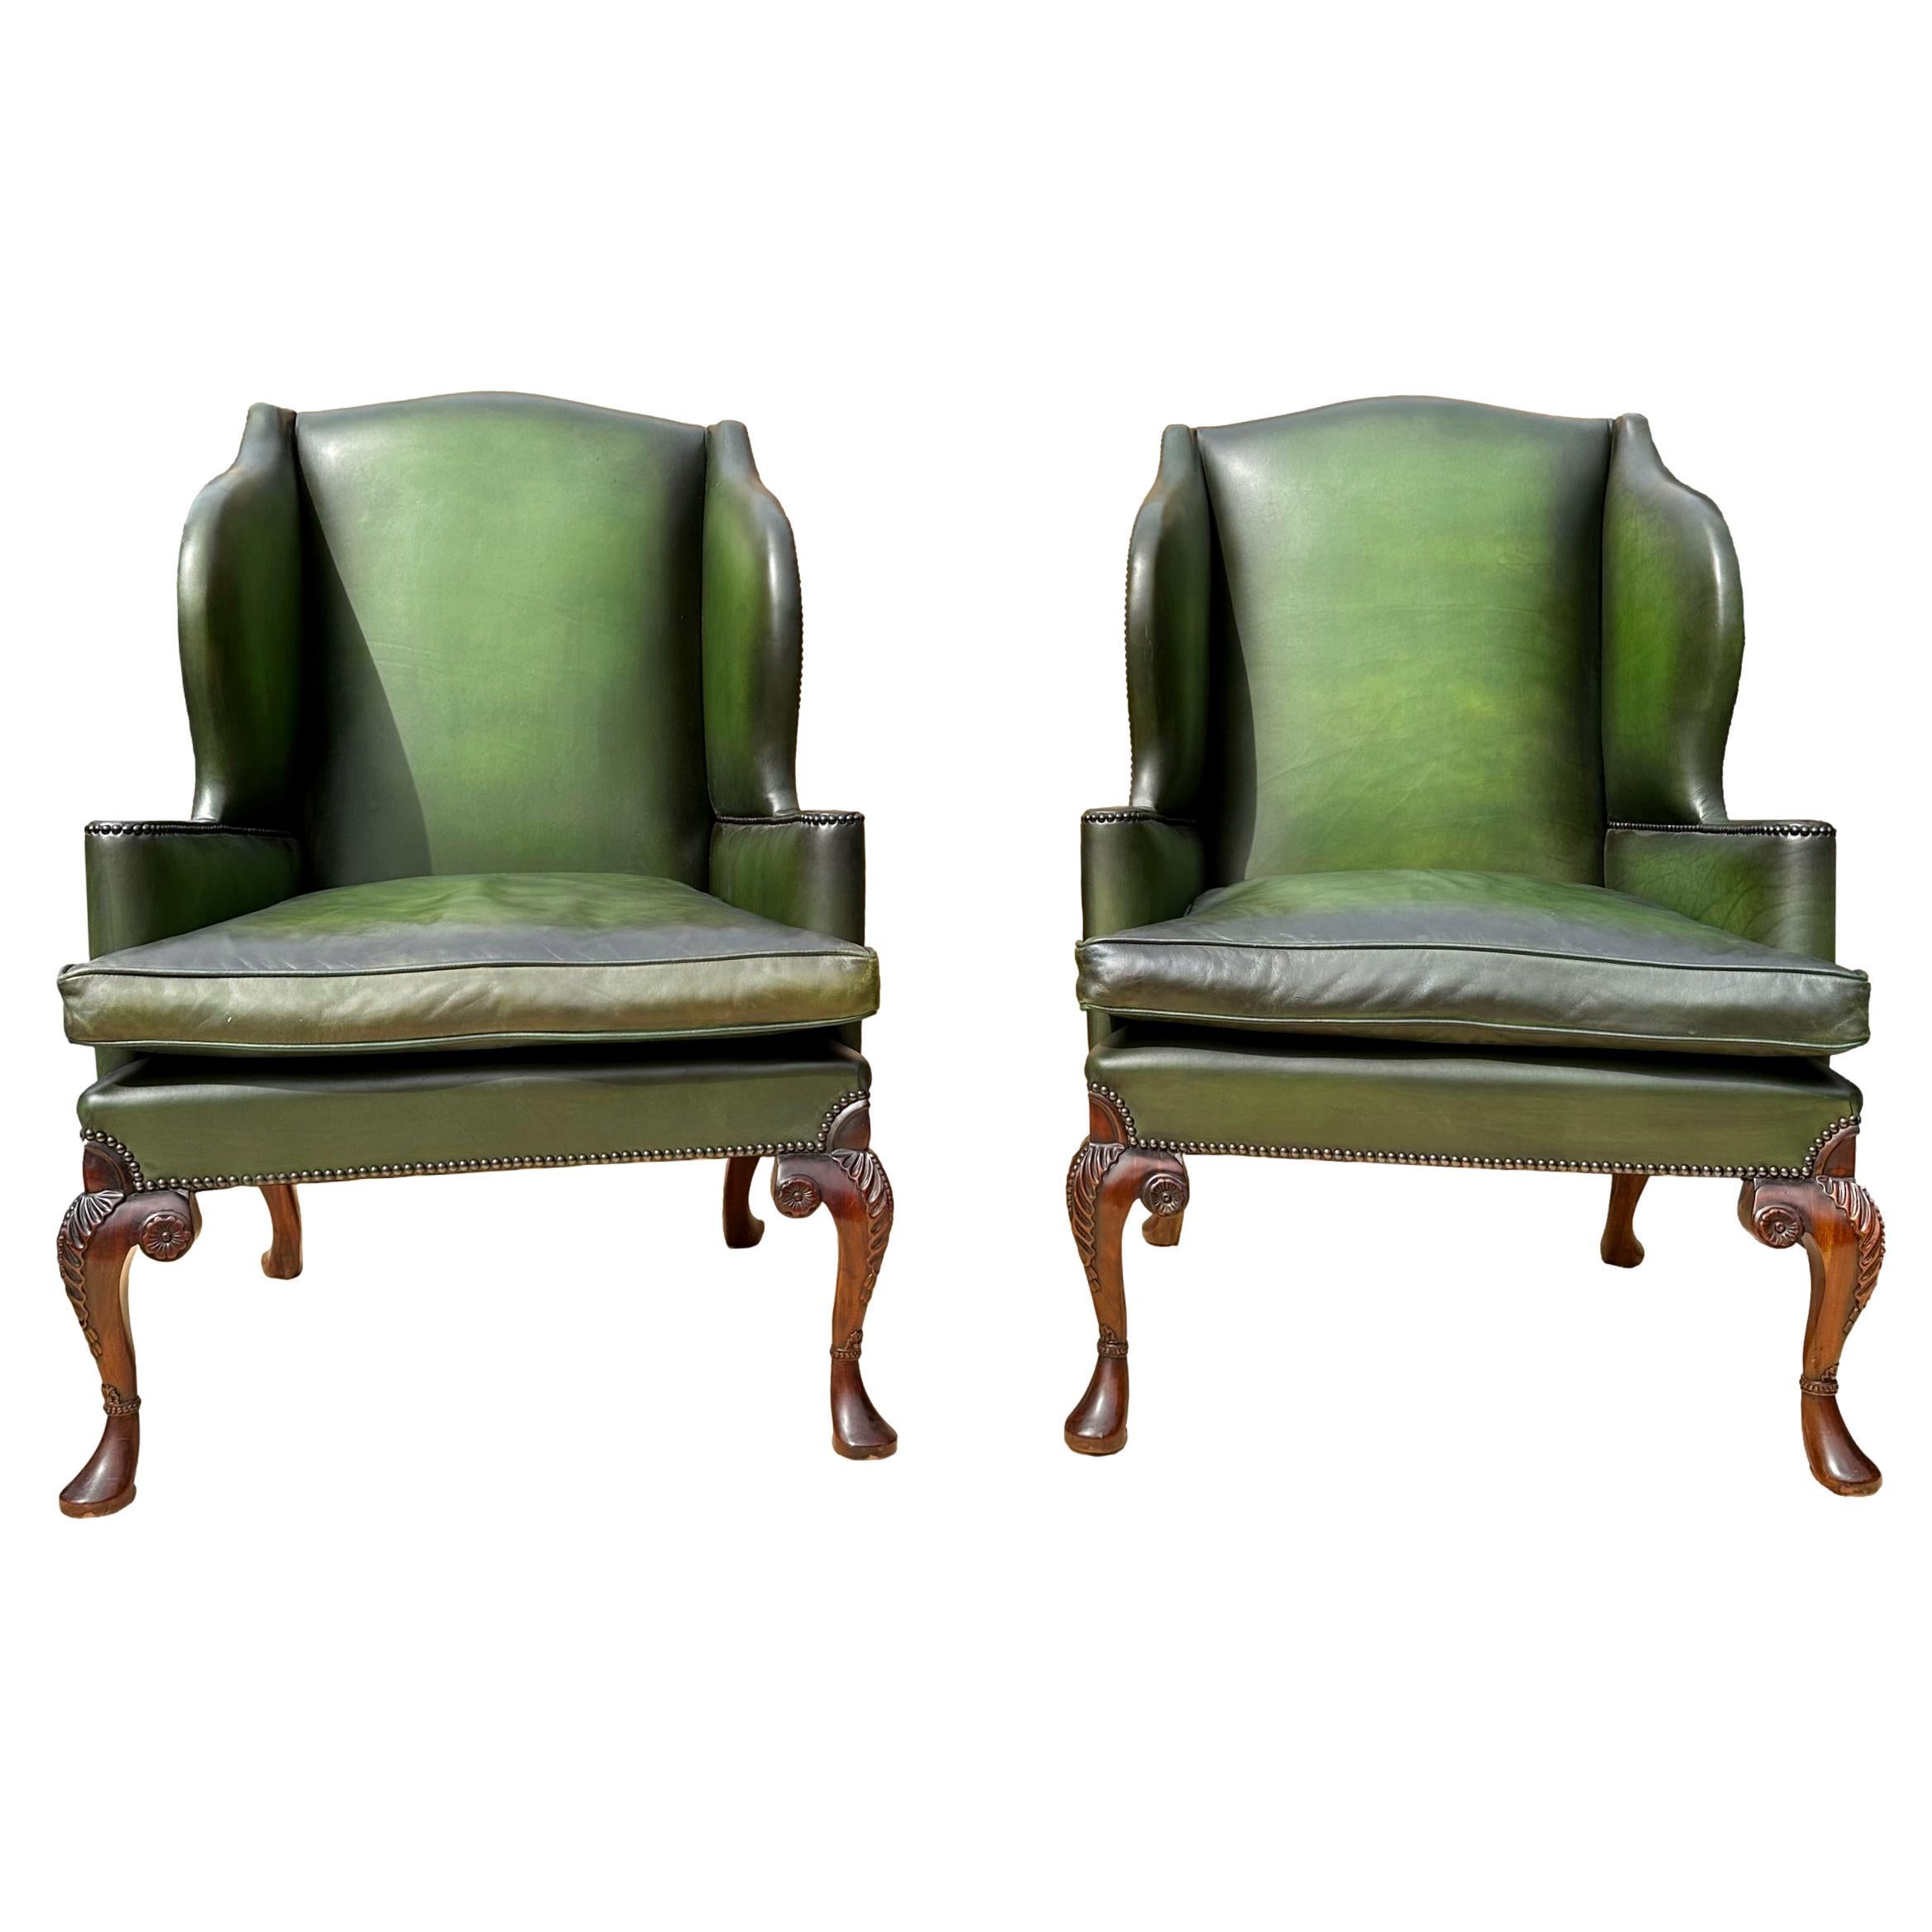 A Pair of Edwardian Green Leather Wing Back Chairs, beautifully proportioned with deep wings, the front legs carved with scrollwork and a Tudor rose, an acanthus leaf to the knees, and a carved cuff, finishing on a solid mahogany pad foot, with down